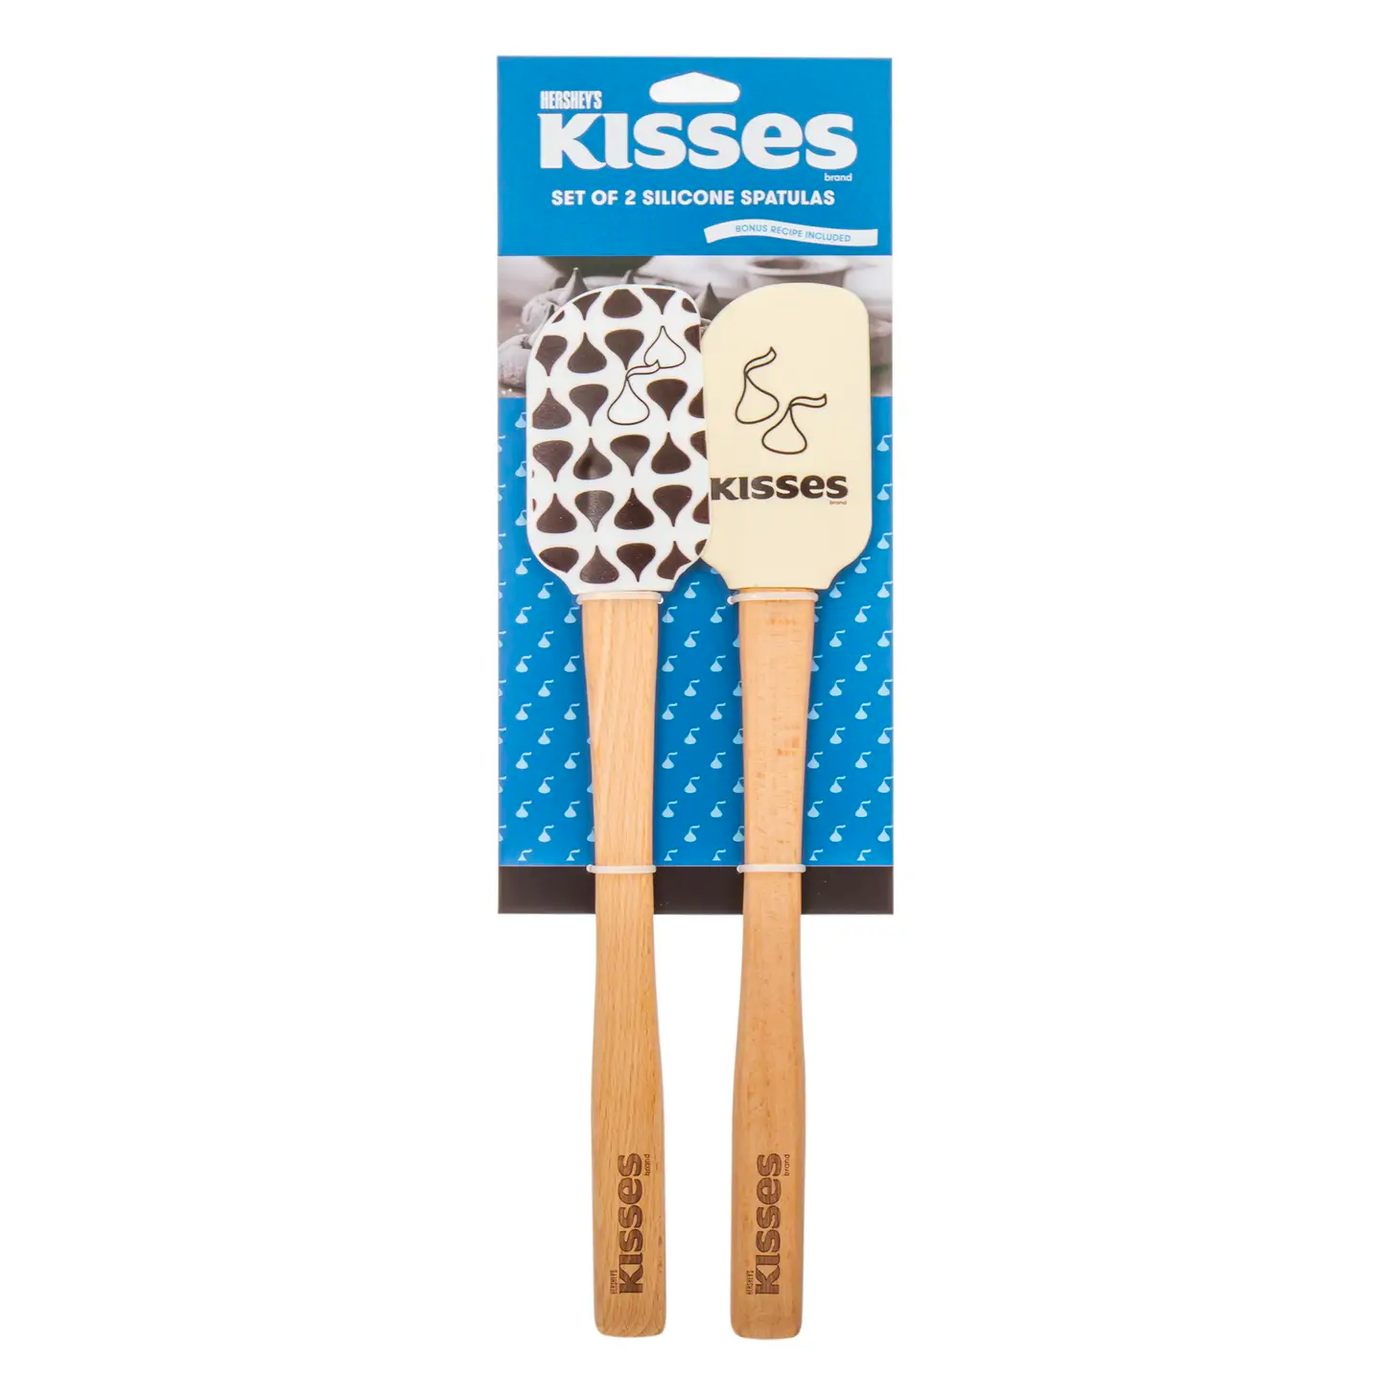 Hershey's Kisses 2 Pack Silicone Spatula Set (1 Count) - Set With Style